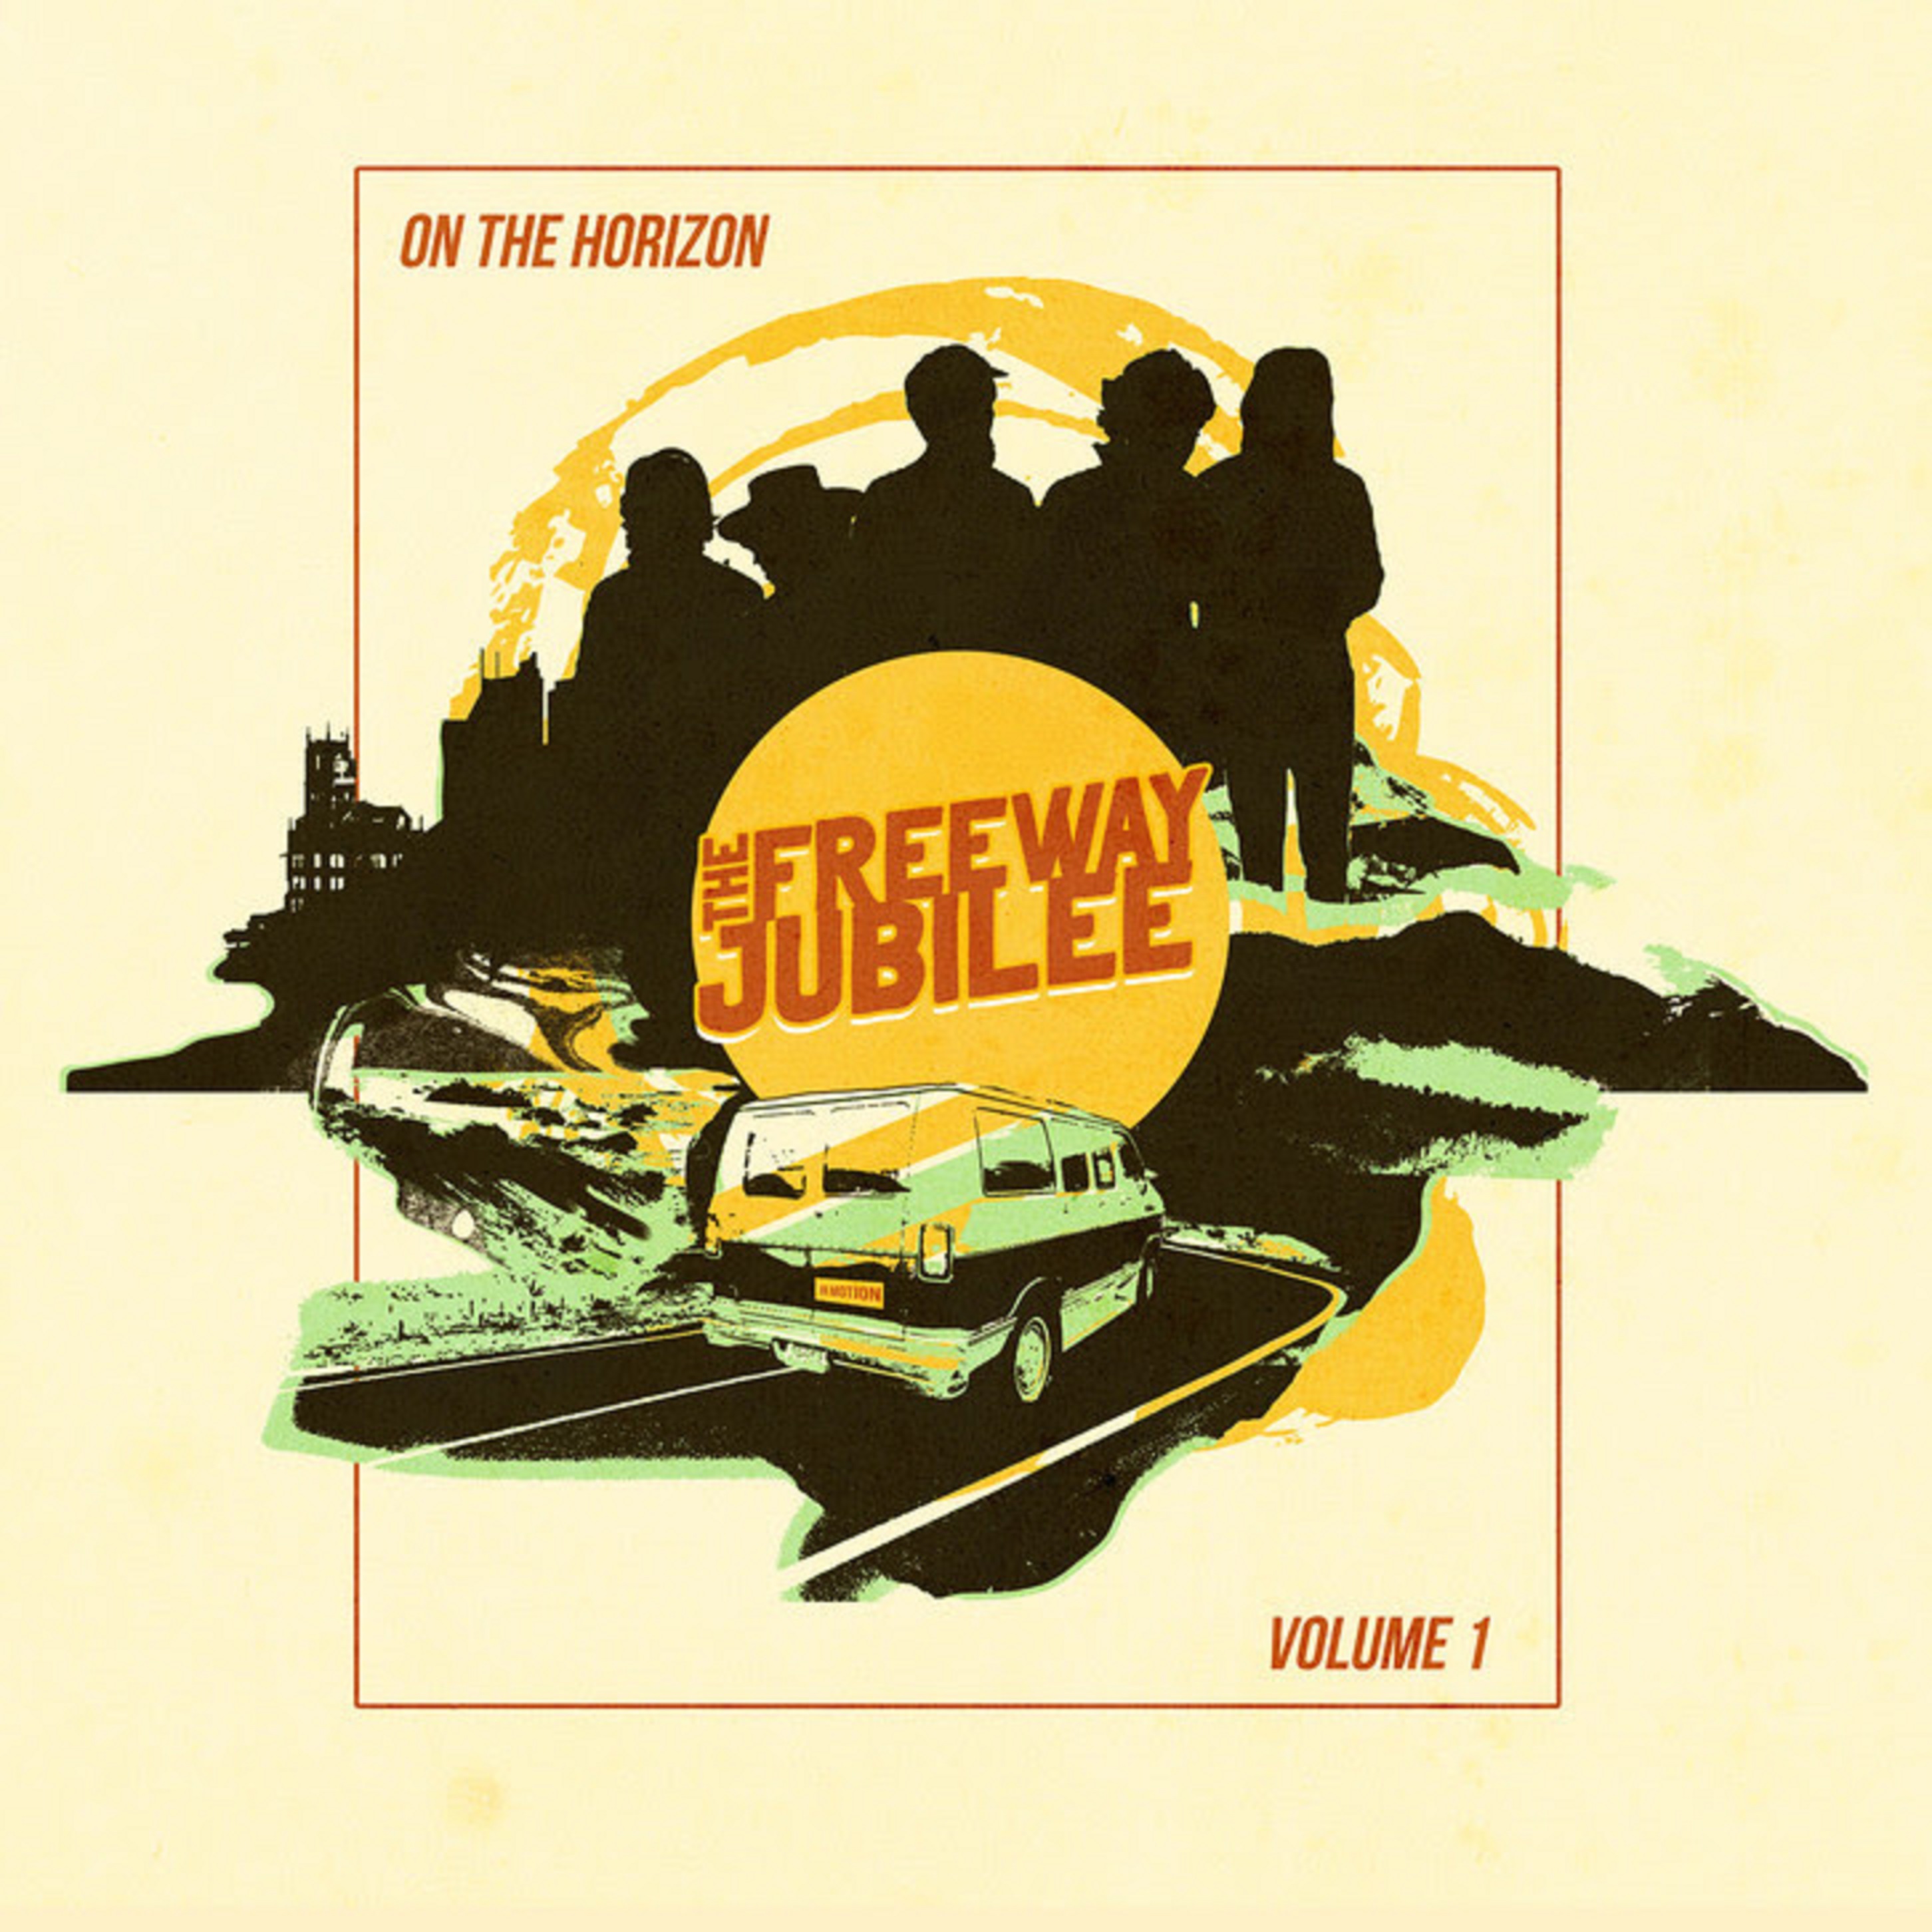 THE FREEWAY JUBILEE KEEPS IT IN MOTION WITH NEW ALBUM ON THE HORIZON VOL. 1